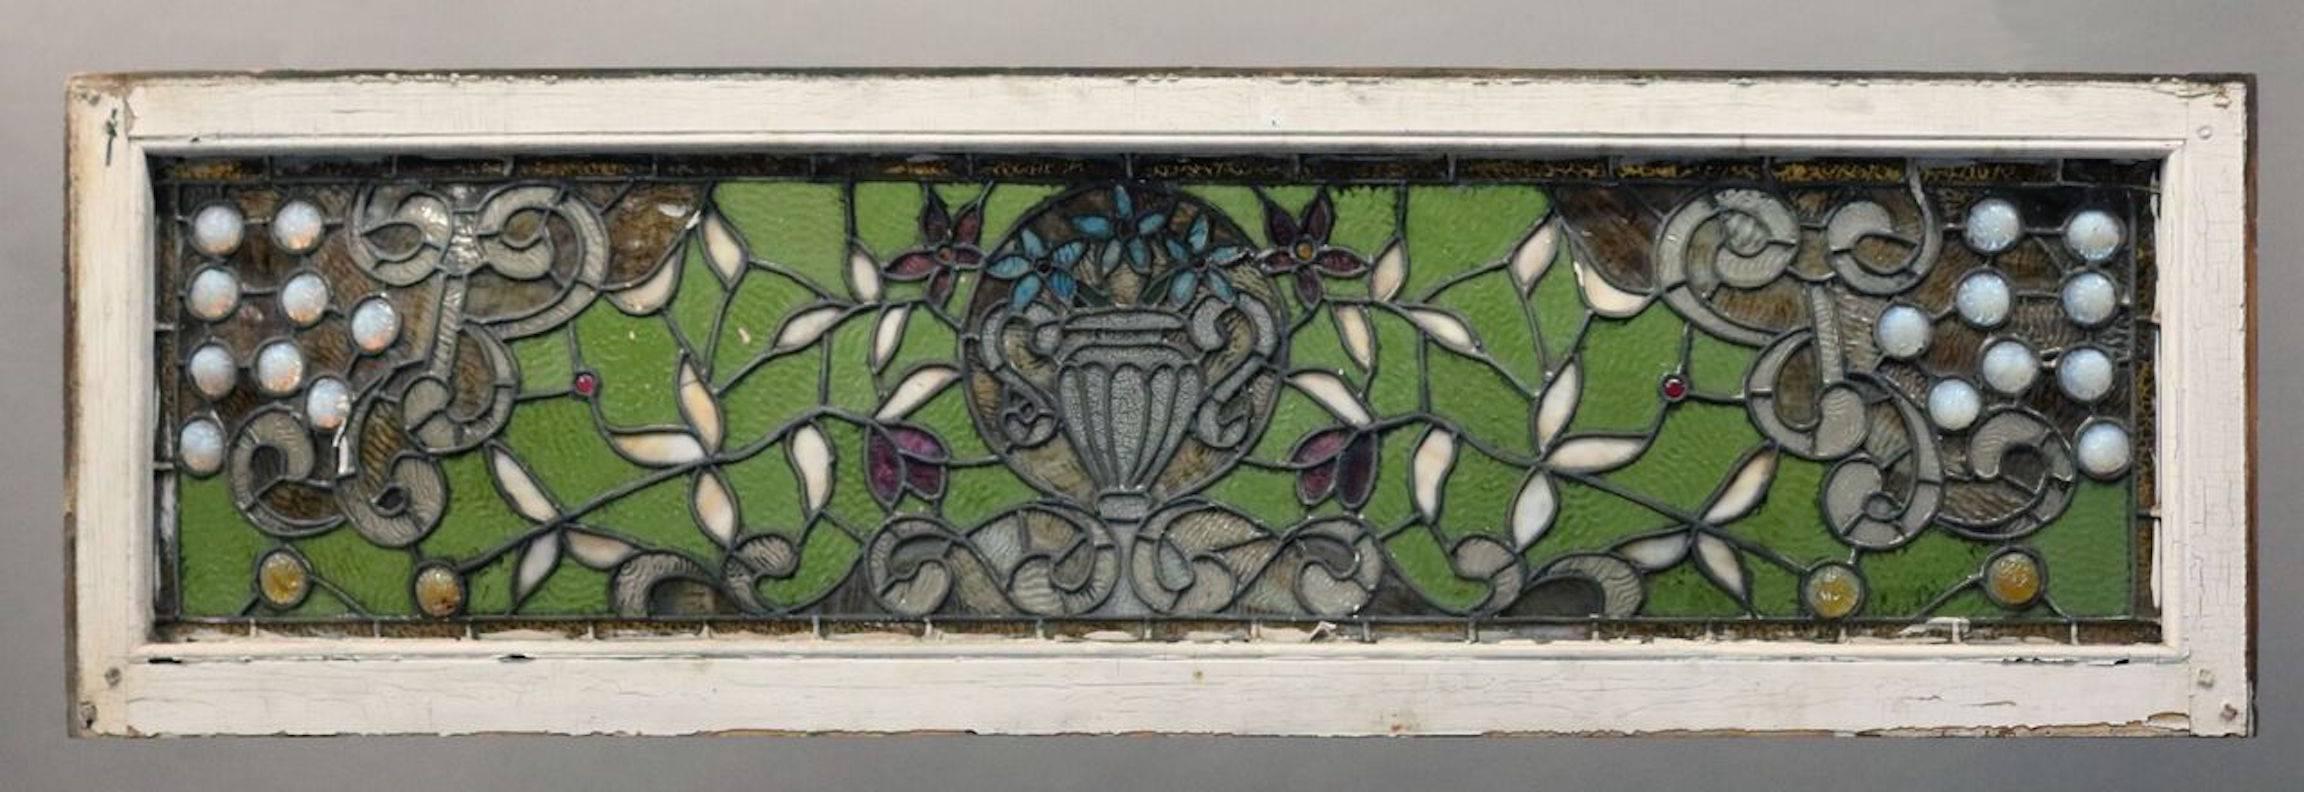 American Antique Chunk Jeweled Tiffany LaFarge Style Window with Floral Urn Design